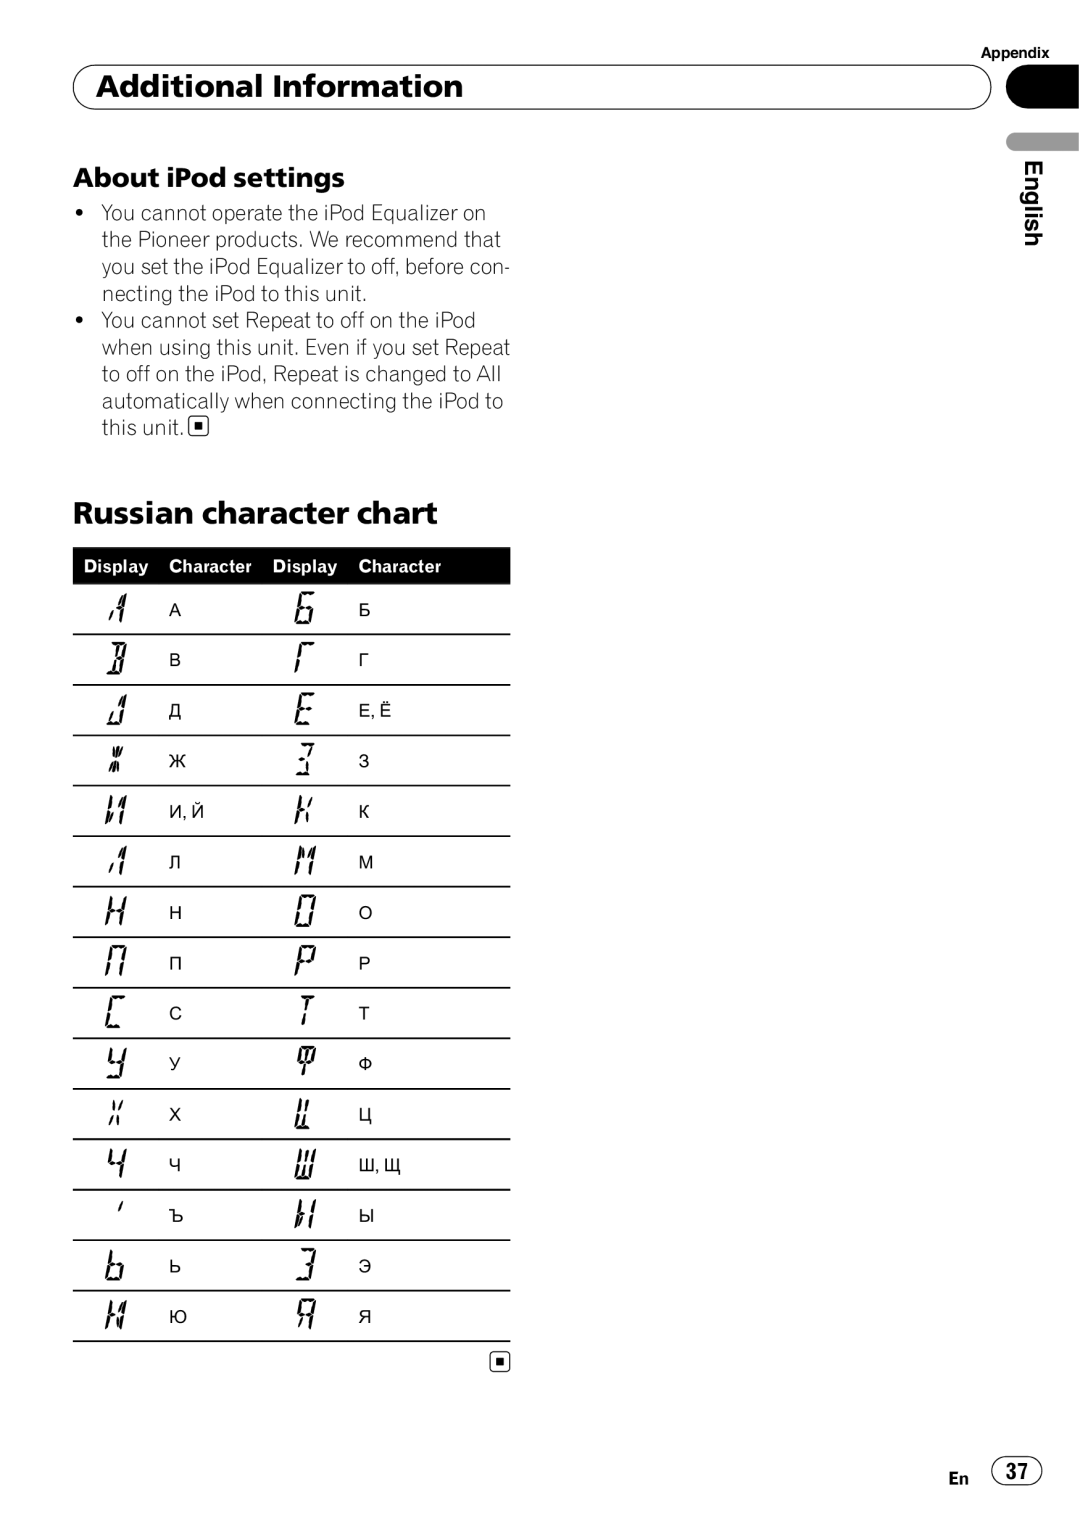 Pioneer DEH-P4900IB operation manual Russian character chart, About iPod settings, Additional Information, English 